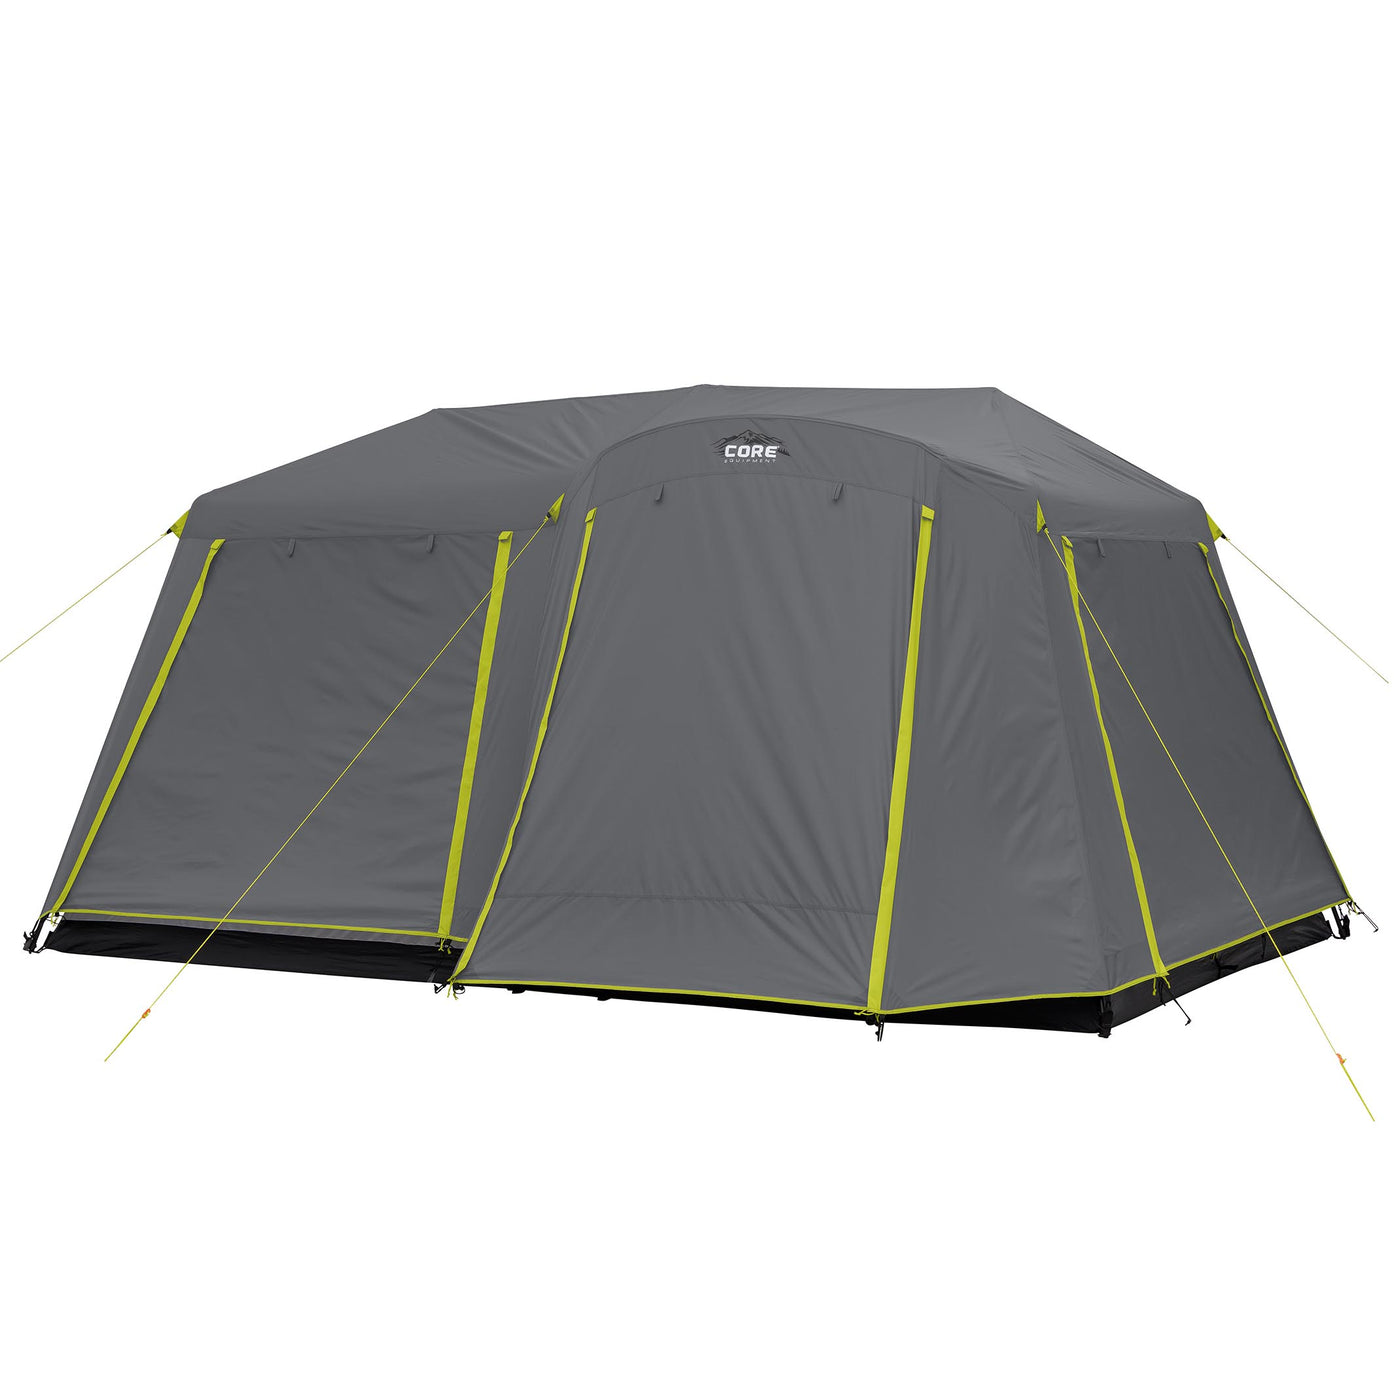 Basics x Dome Camping Tent With Rainfly 9 4-Person Feet